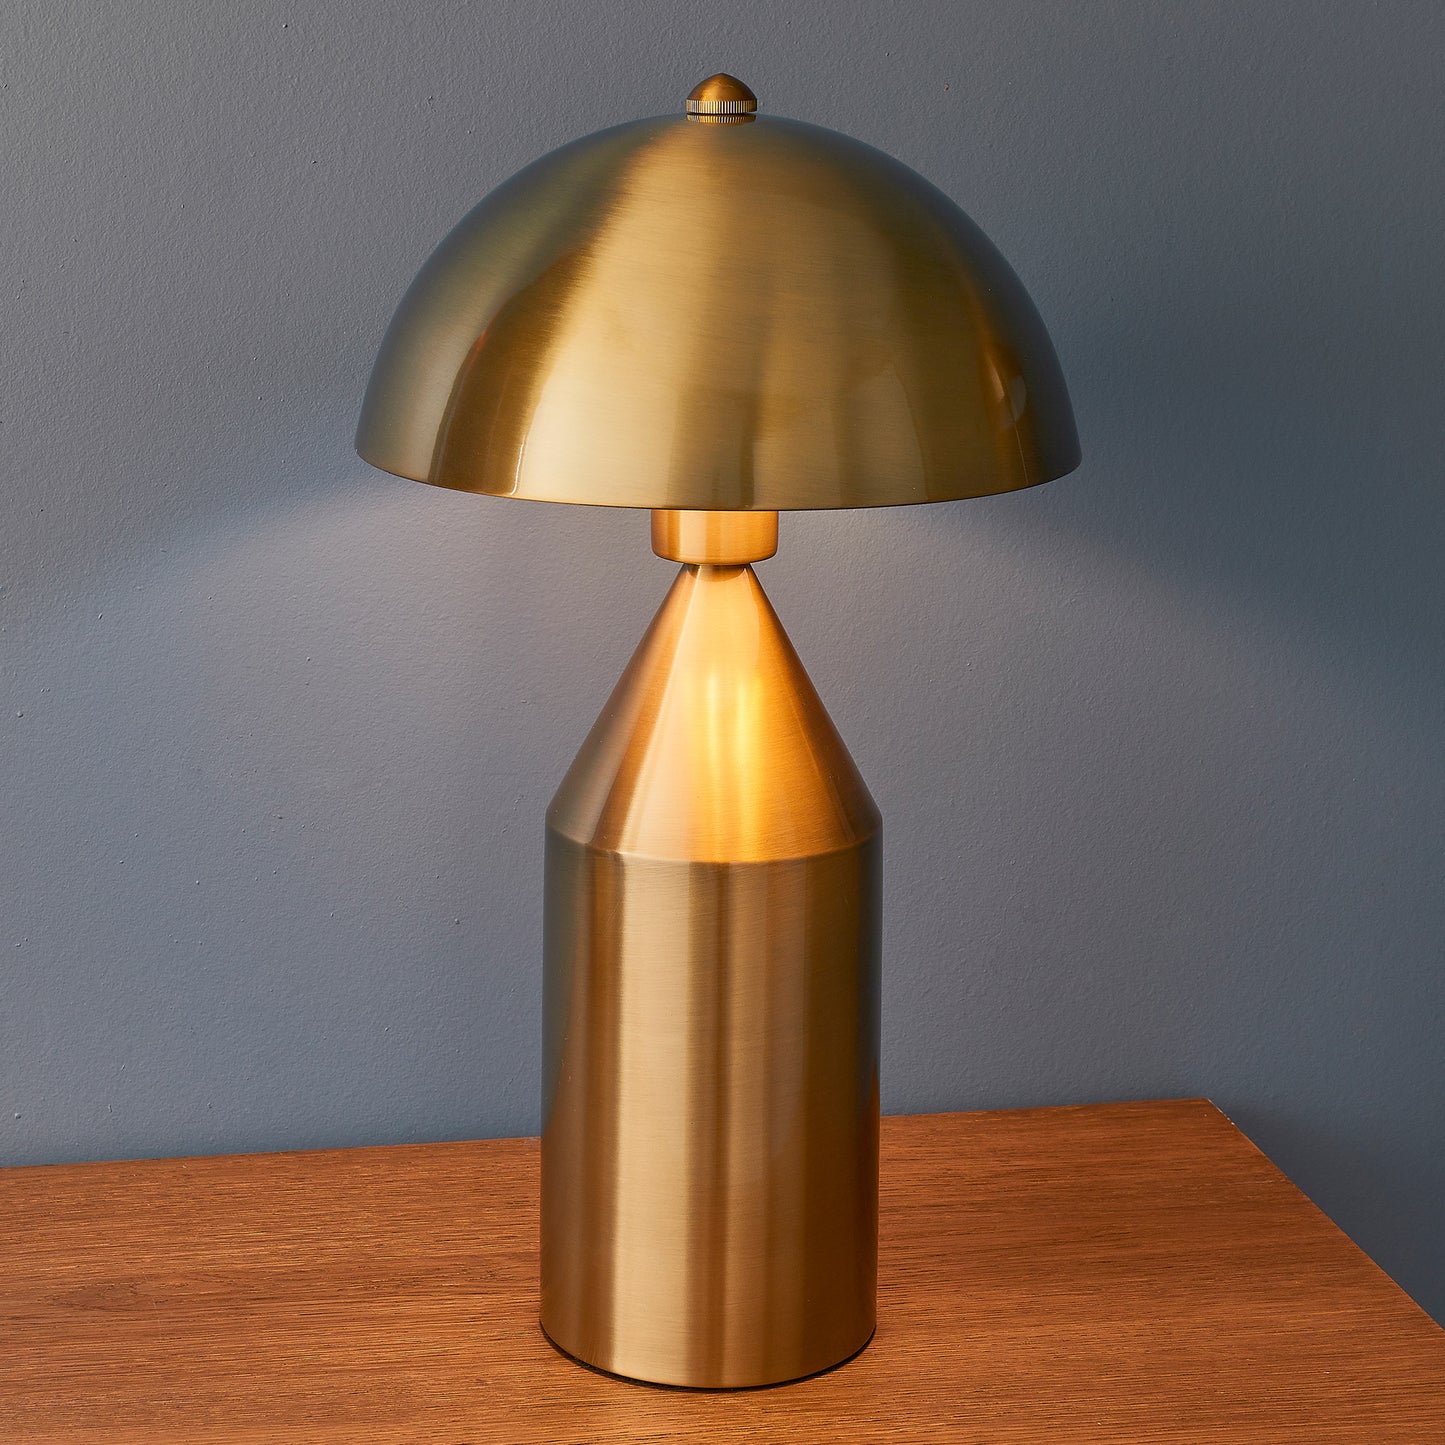 A Nova 1 Table Light Antique Brass as interior decor on a wooden table from Kikiathome.co.uk.